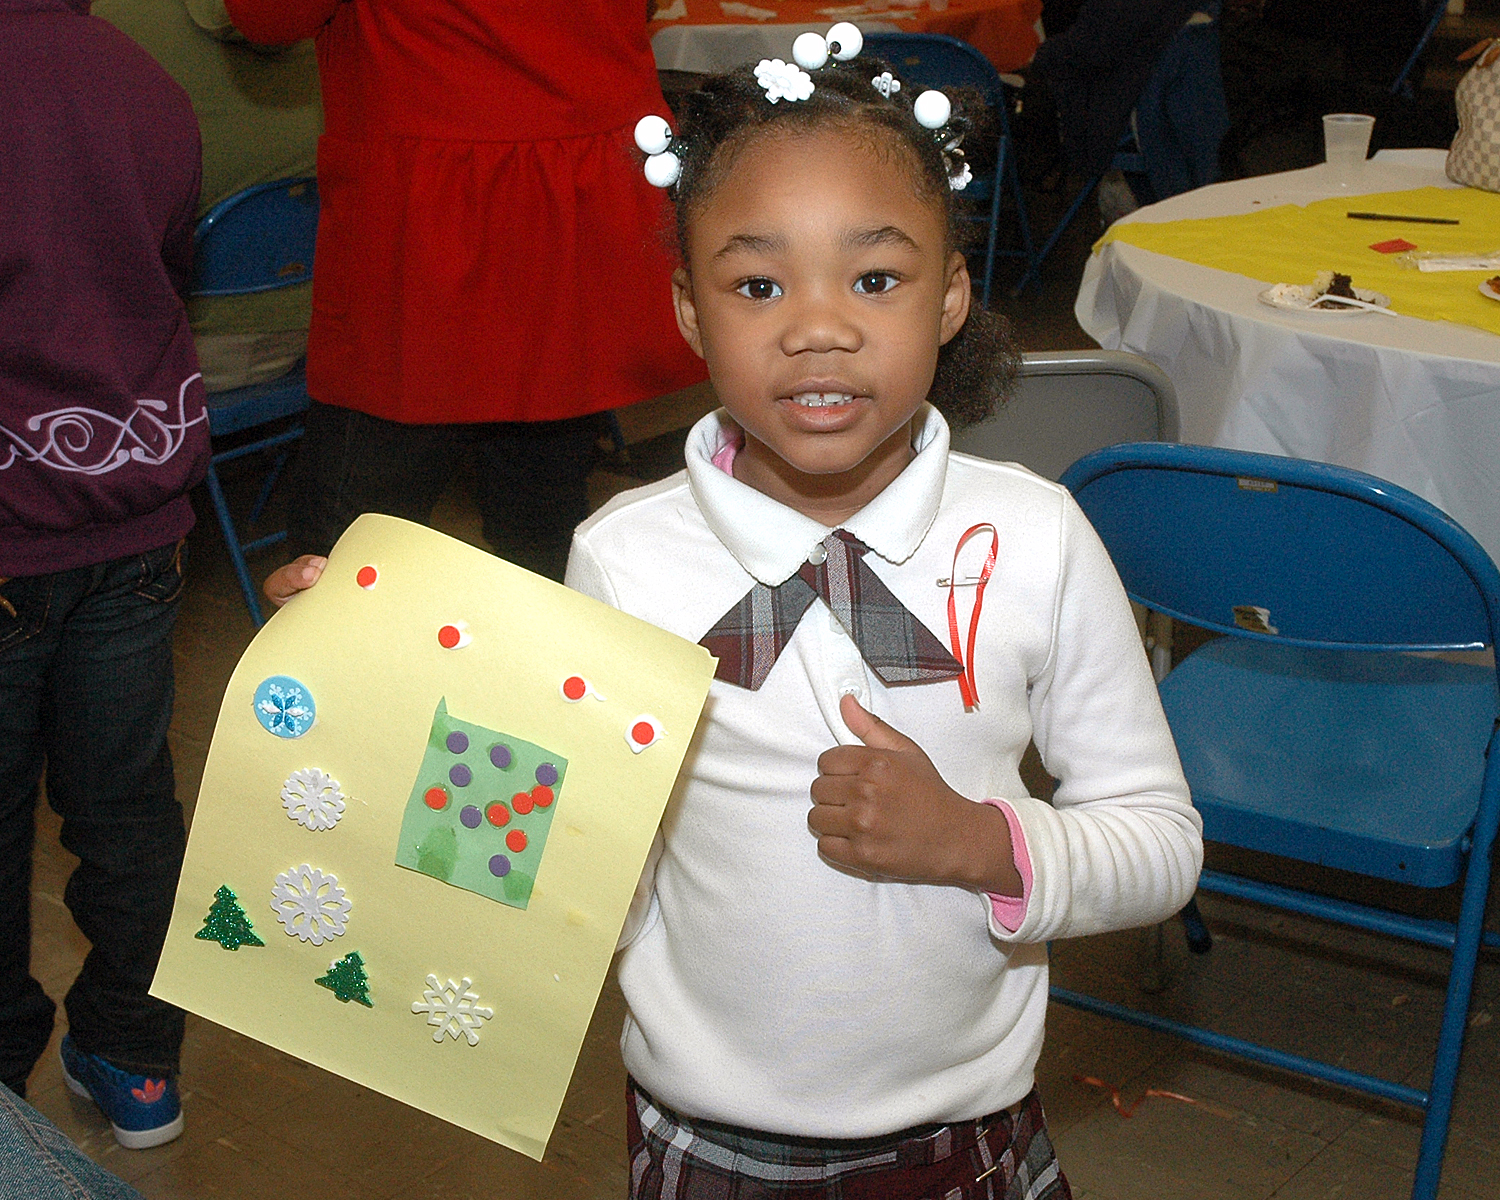 An attendee proud of the artwork that she created at Kids Korner